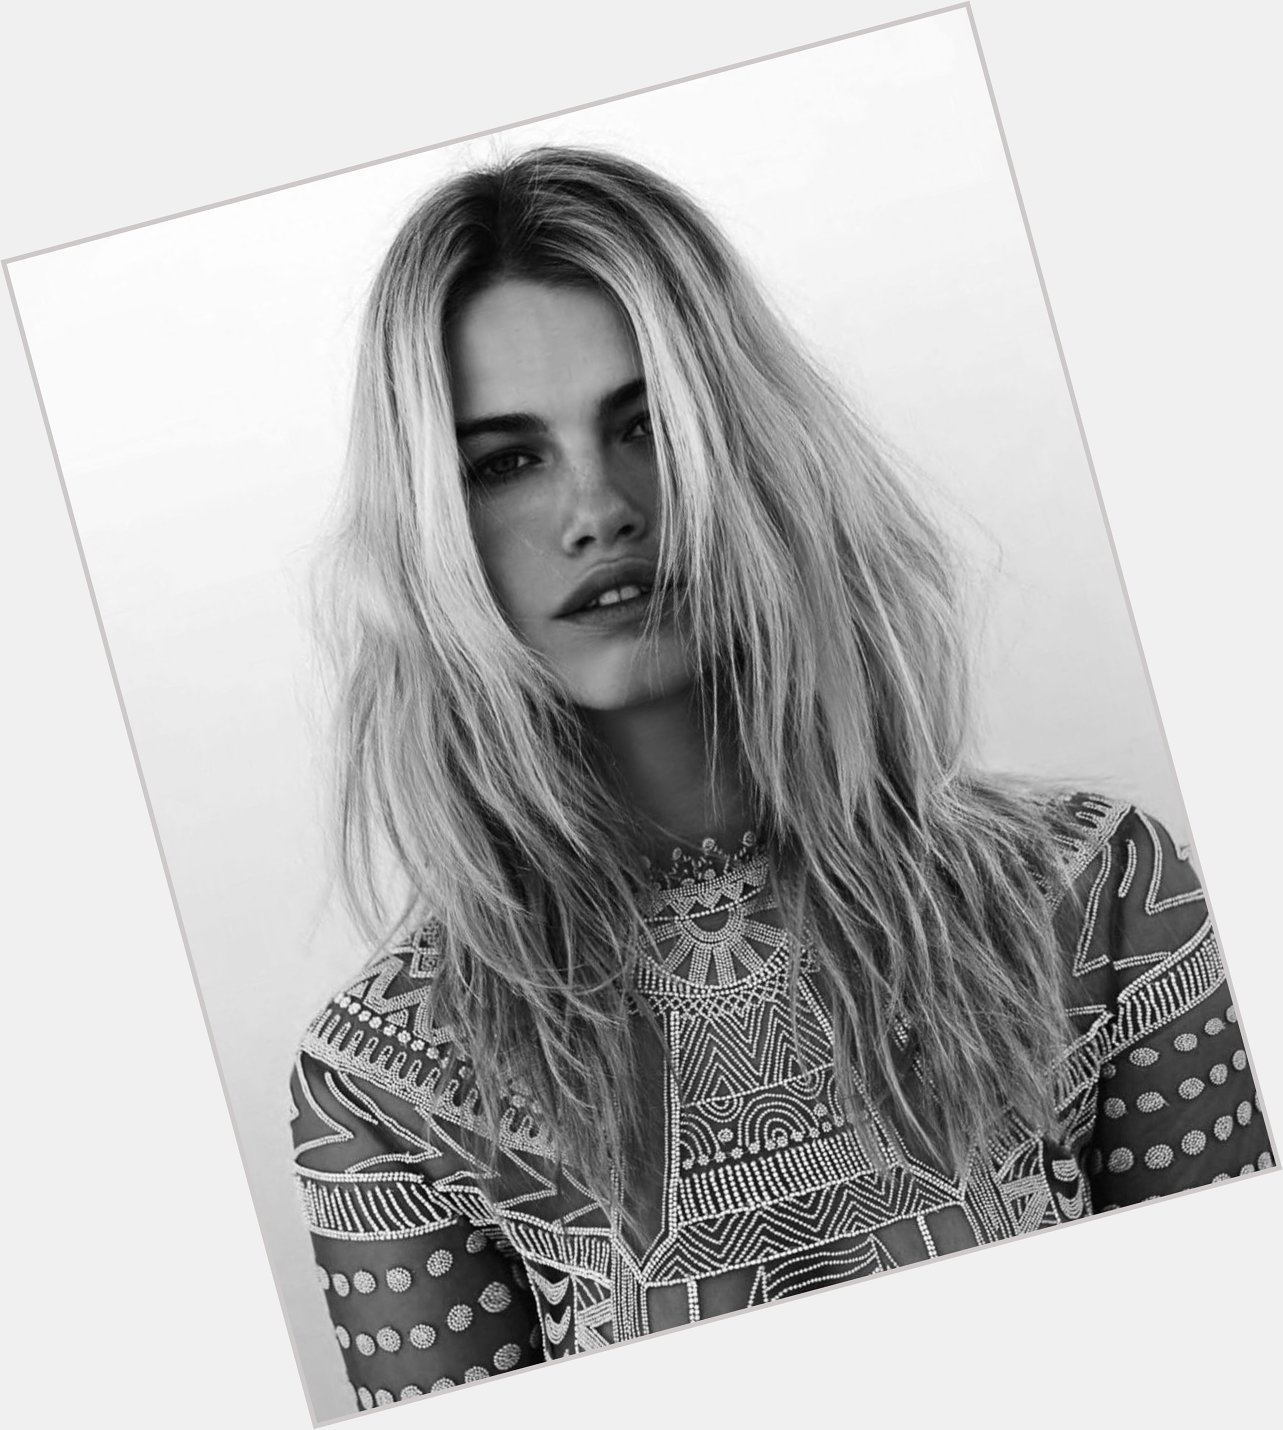 A belated Happy Birthday to Hailey Clauson who ranks on our Global Fashion Model List  